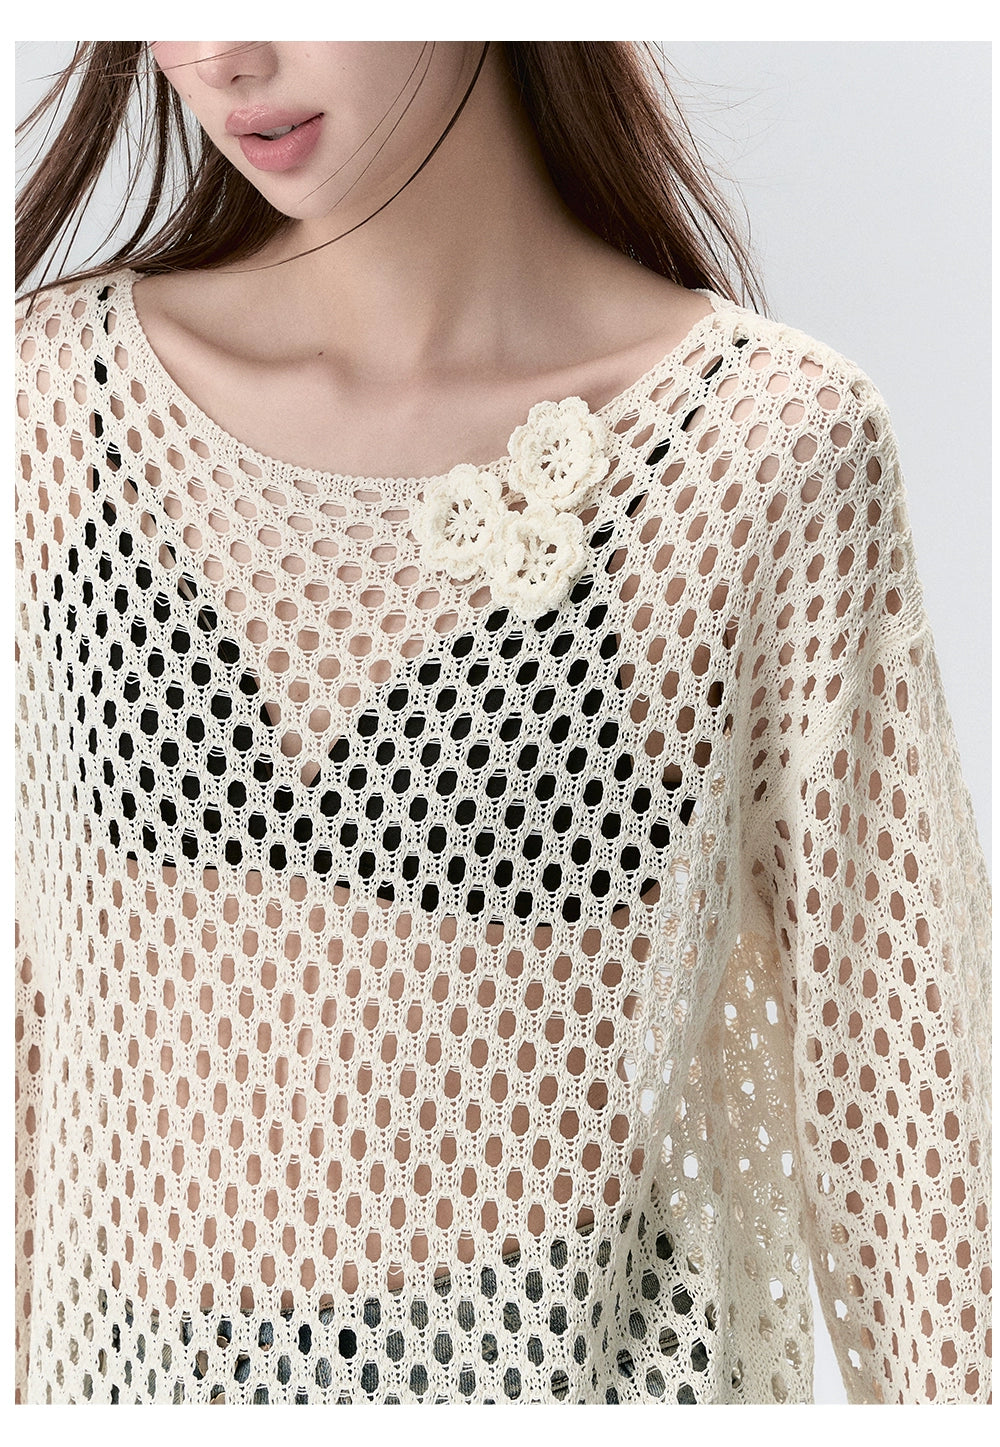 Milk Silk Sheer Mesh Hollow-Out Blouse - CHINASQUAD